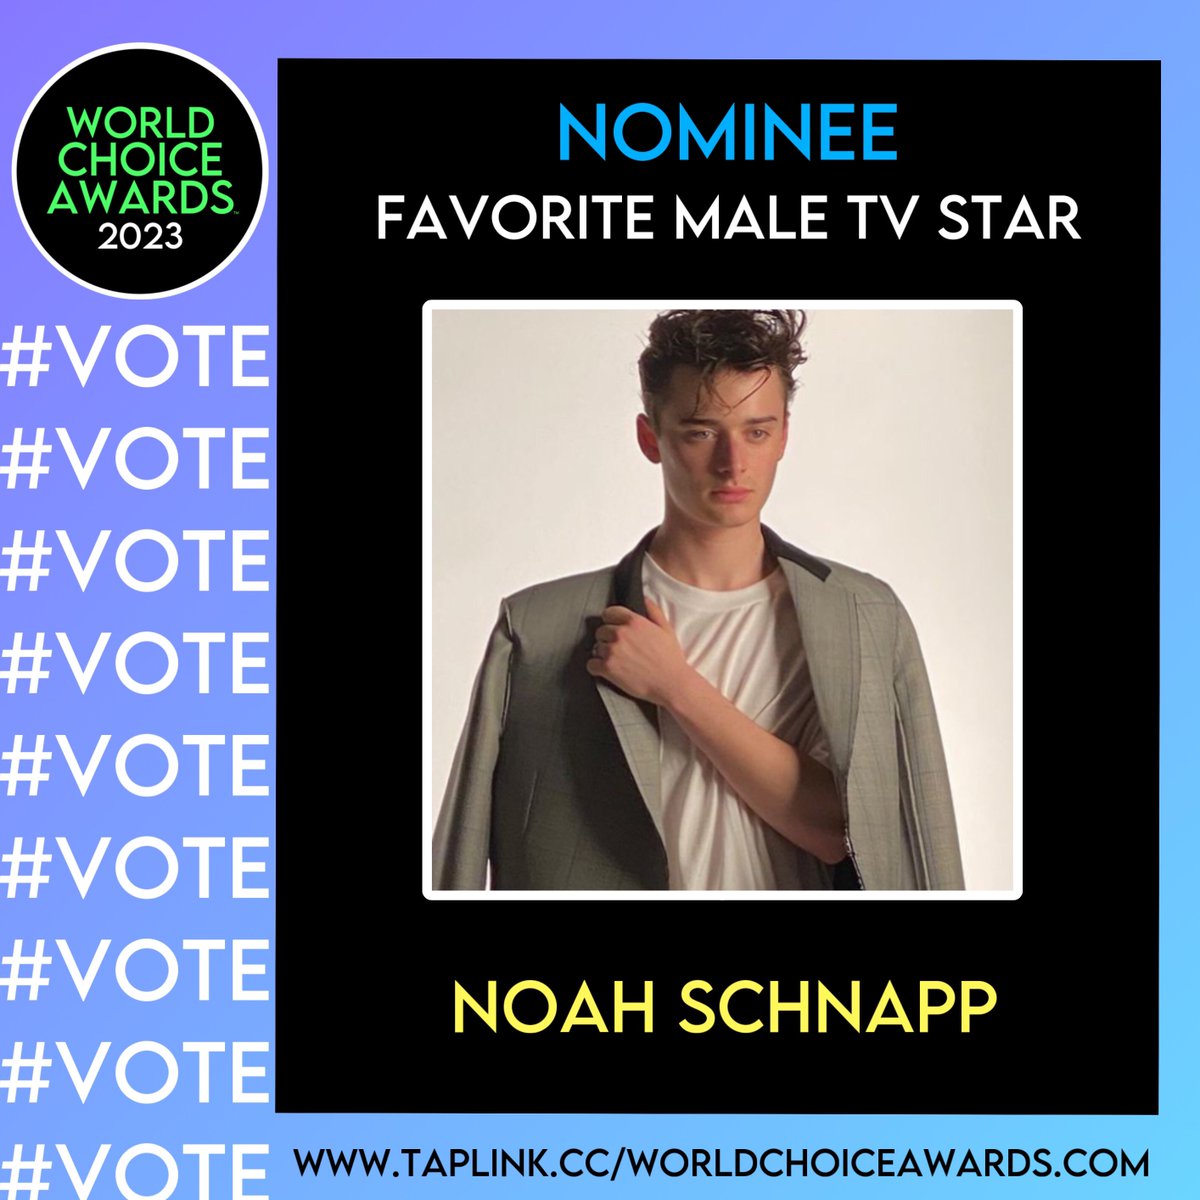 #WorldChoiceAwards 2023 #nominee 

Favorite Male Actor

Noah Schnapp

Tap the link in our Bio to Vote Now!!!

#vote #favorite #maleactor #awards #noahschnapp  #strangerthings